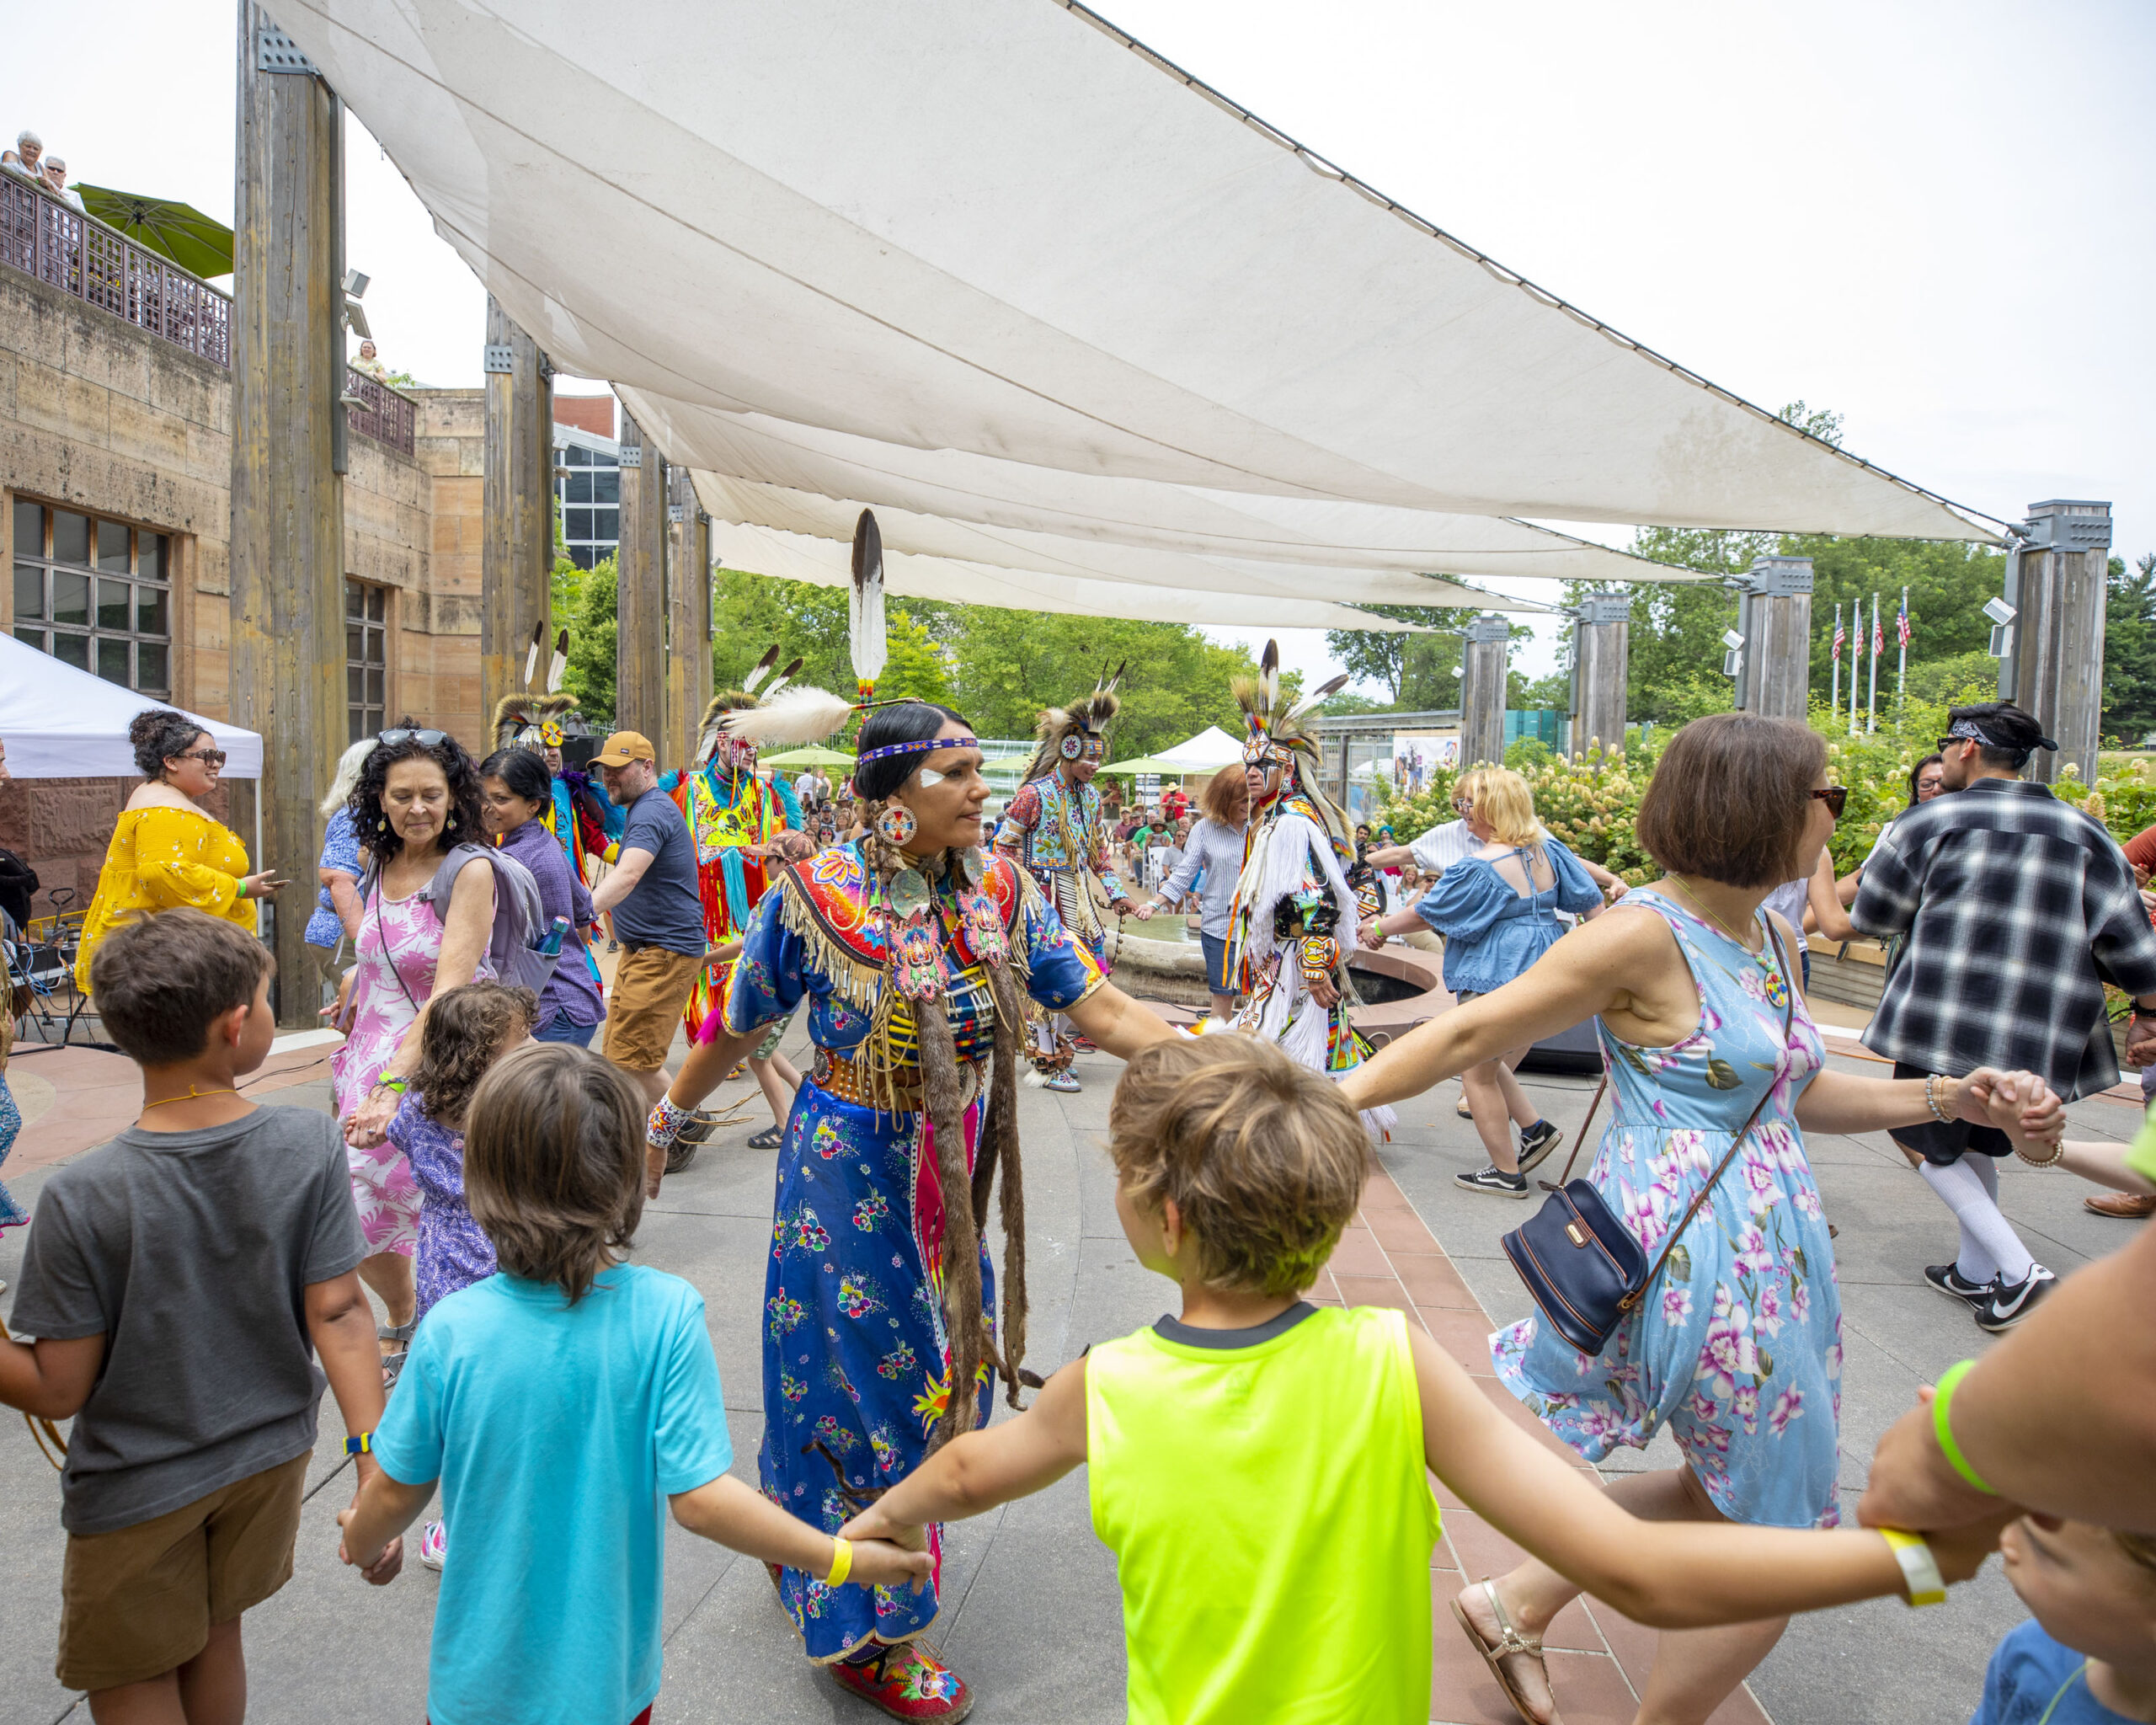 On June 24 and 25, 2023, several performers are scheduled to give music and dance performances under The Sails at the Eiteljorg Indian Market and Festival. In 2022, one of last year’s performers, the Woodland Sky Native American Dance company, got the audience involved in a dance.